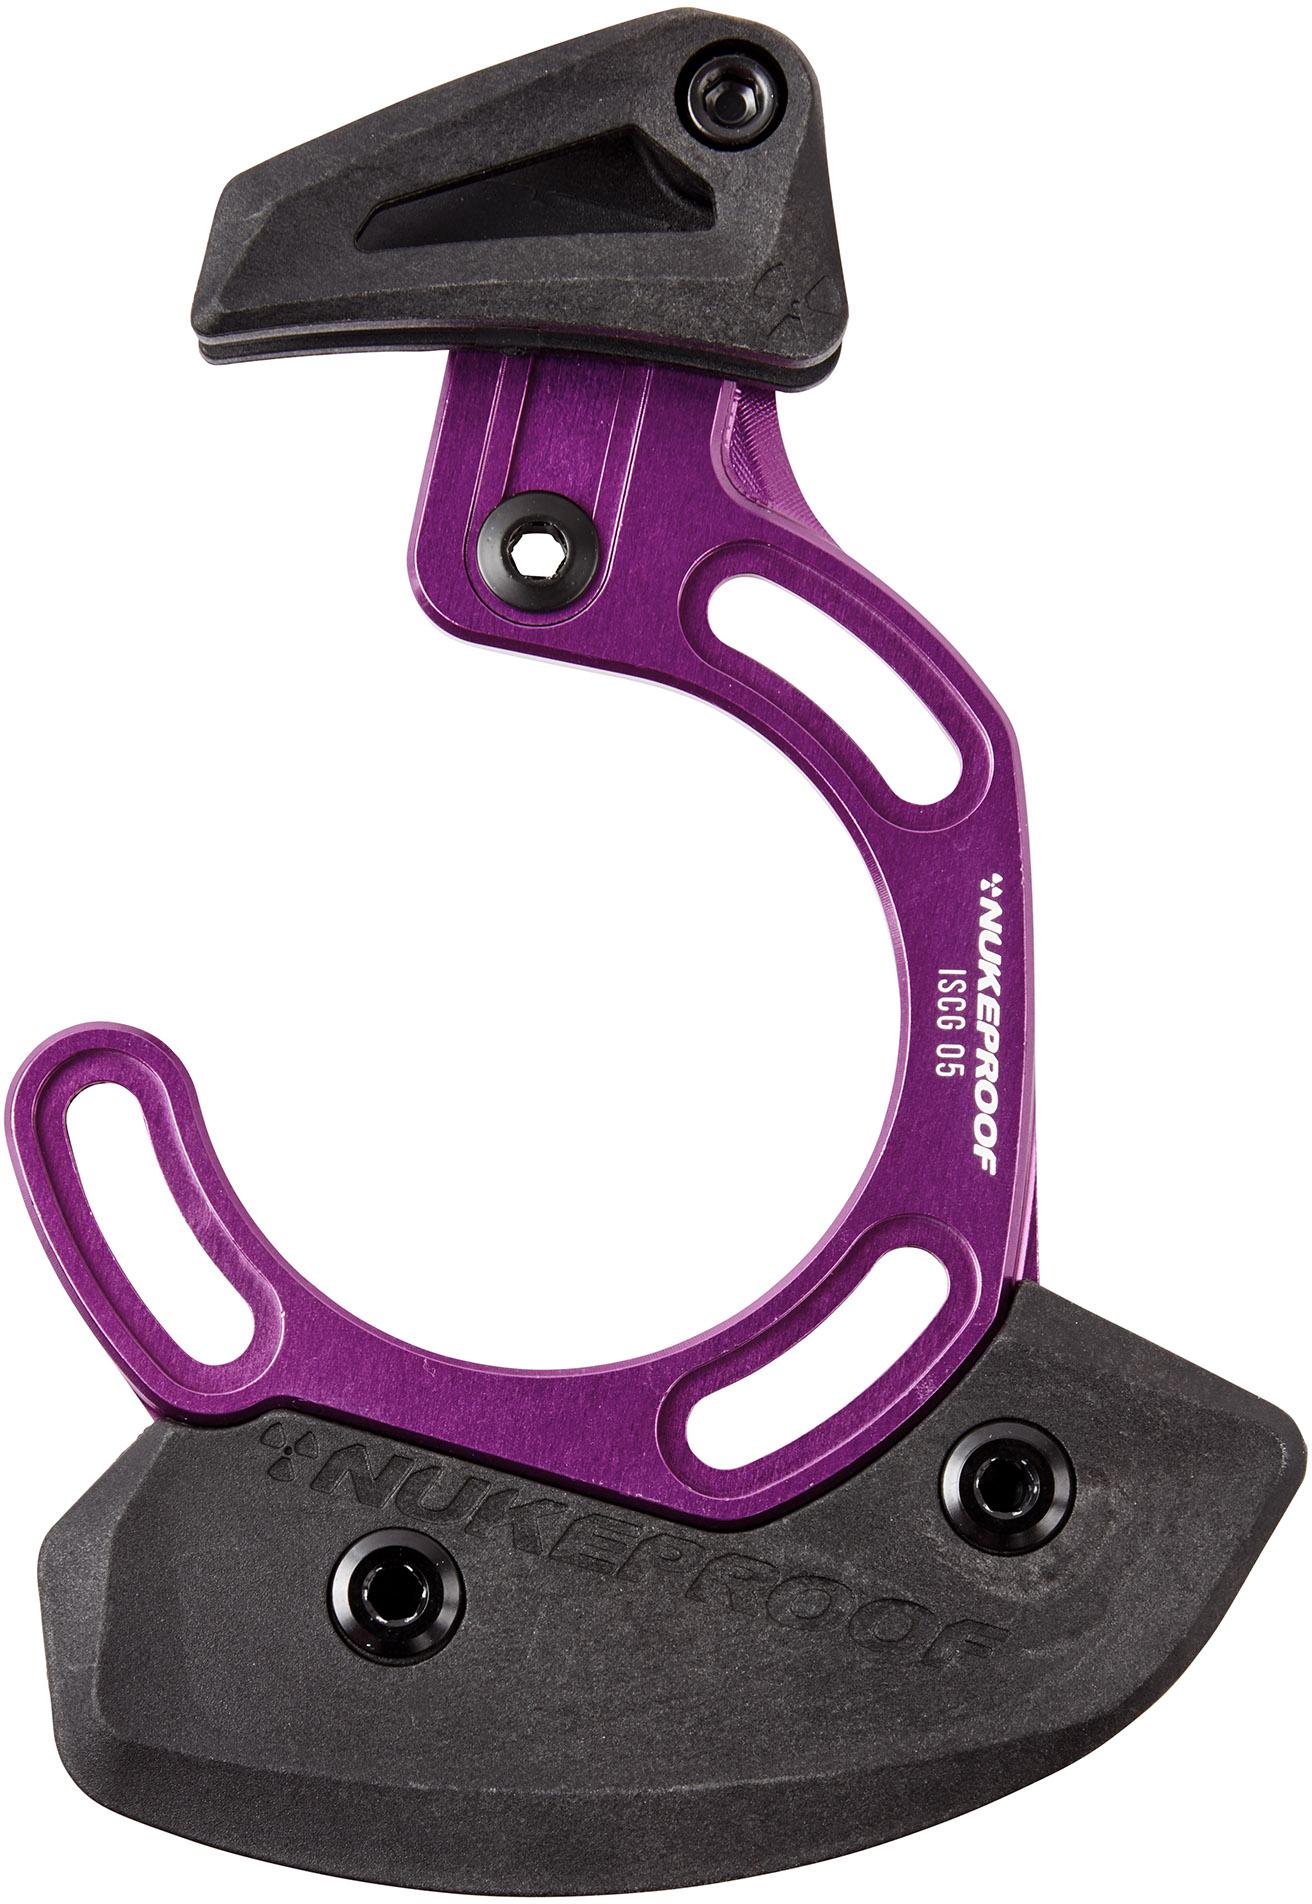 Nukeproof Chain Guide Iscg 05 Top Guide With Bash  Purple/black